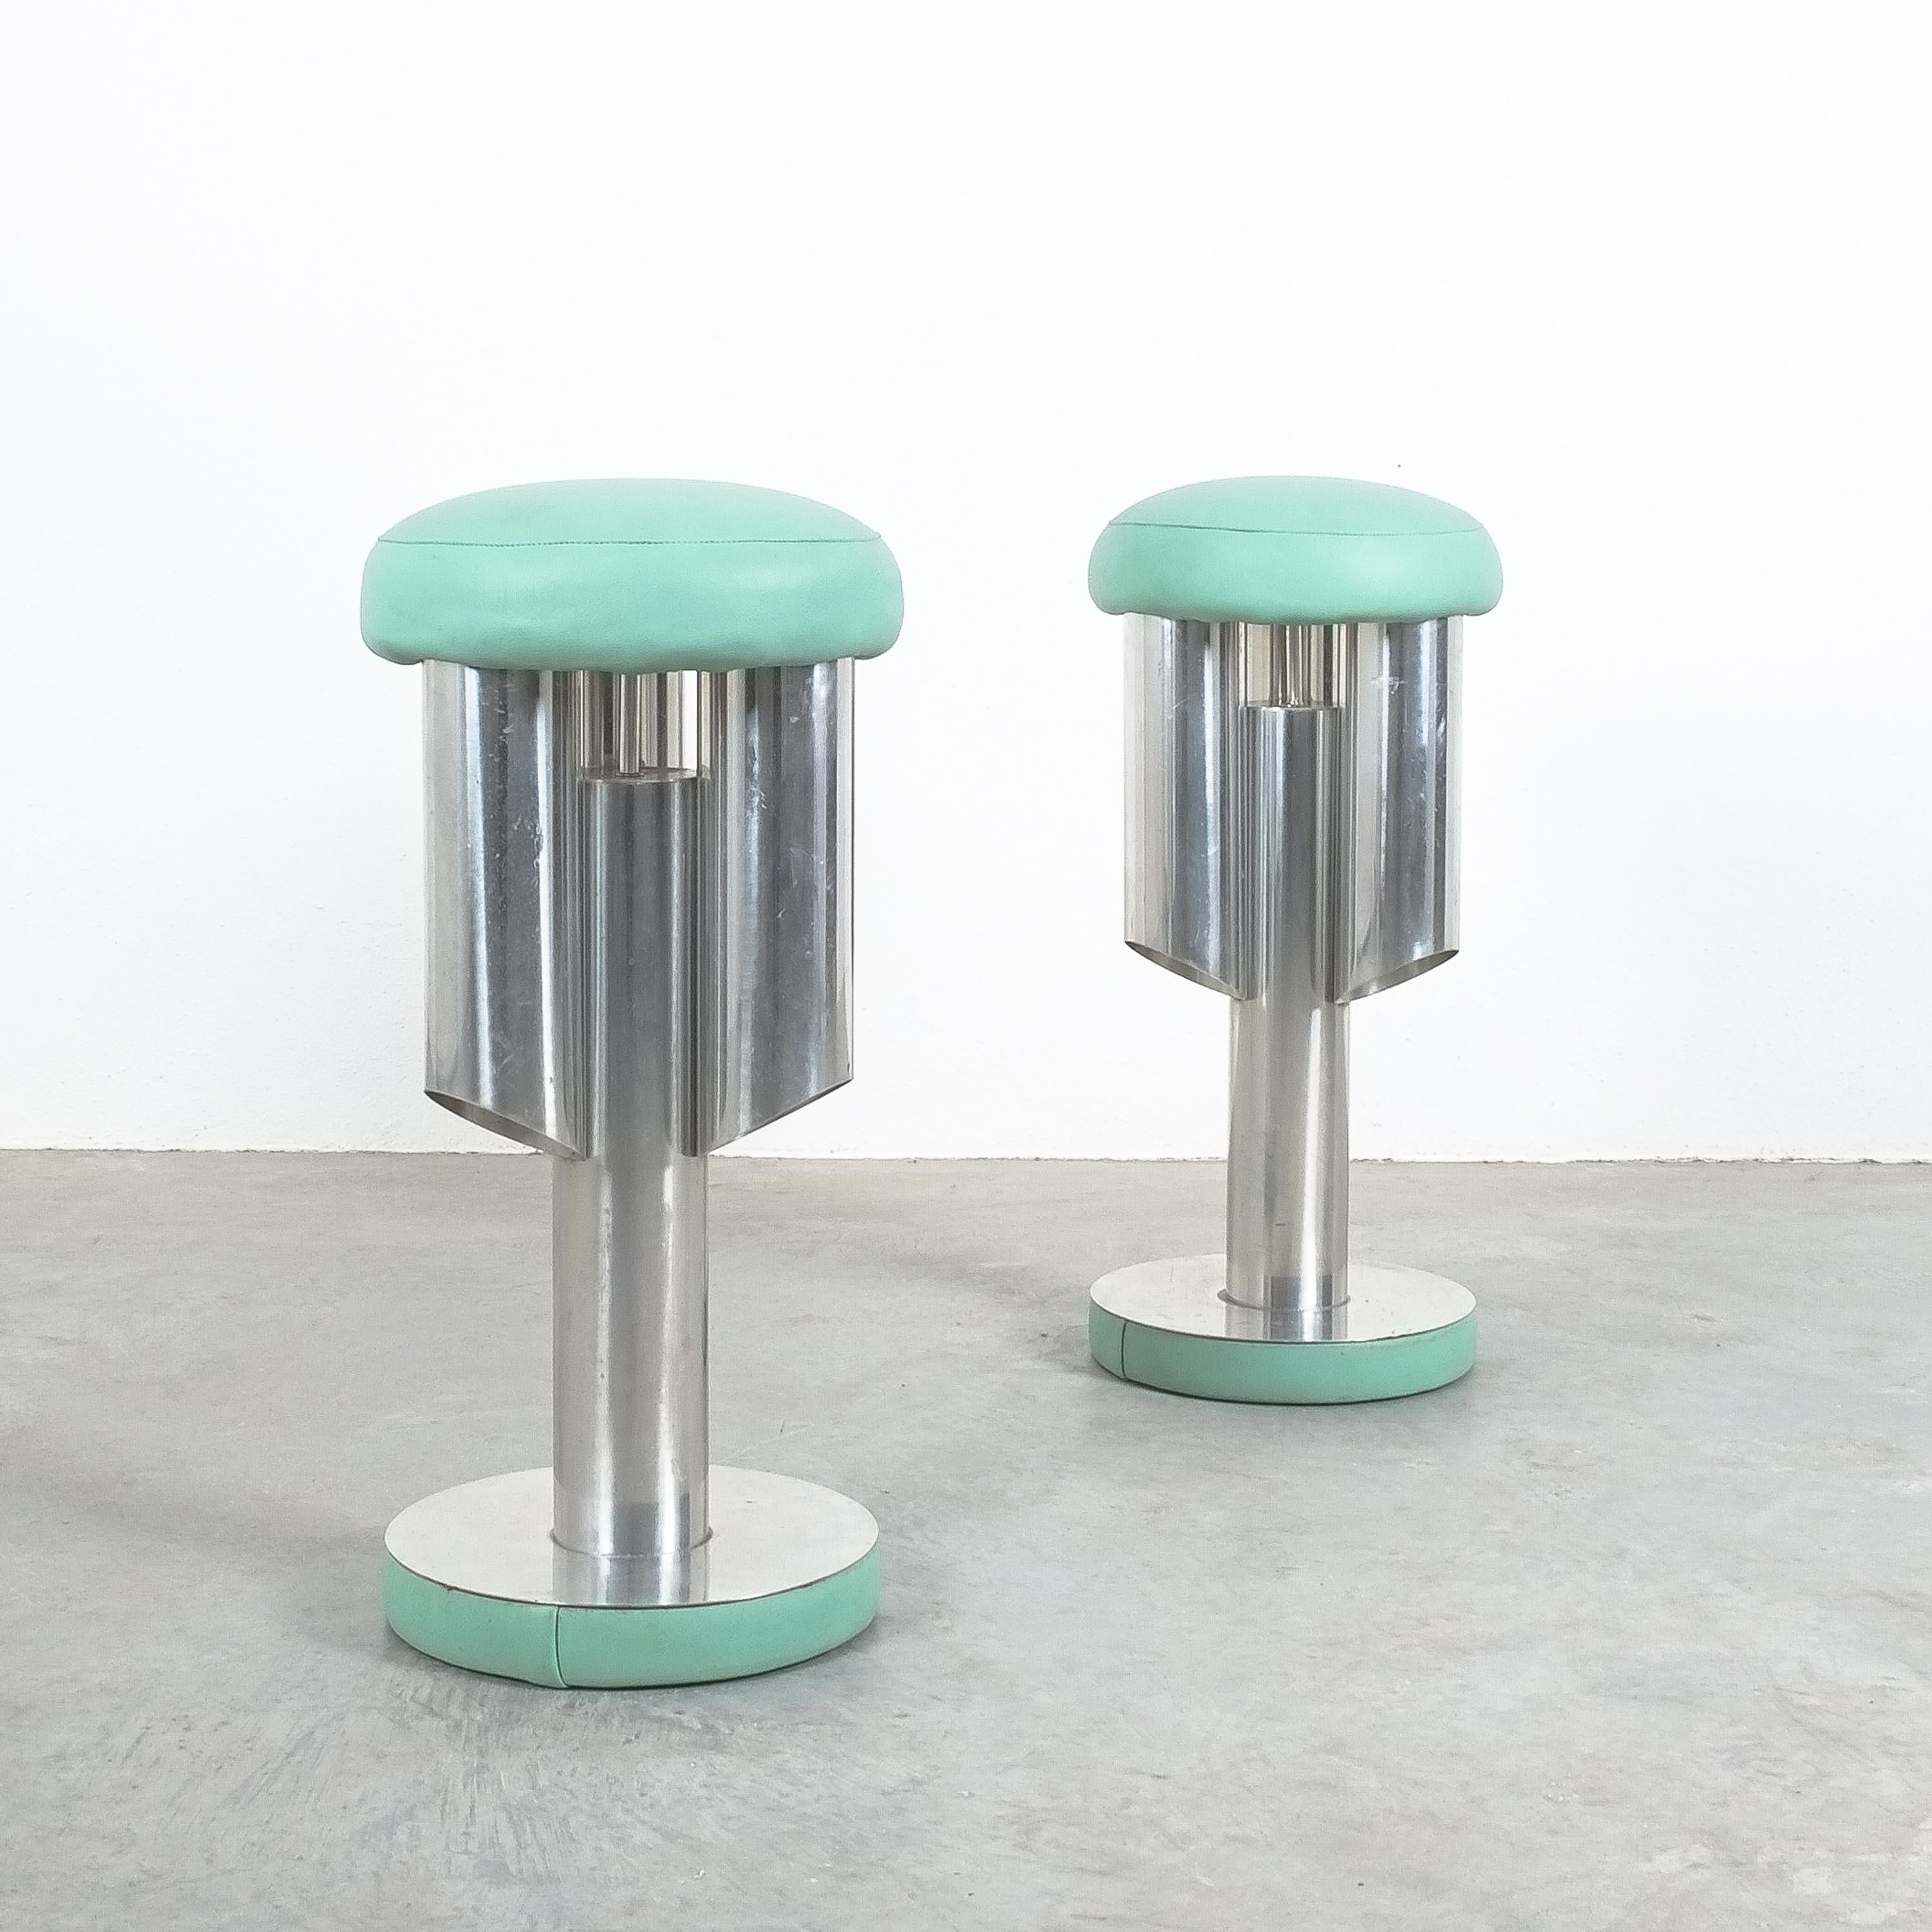 Great pair of aeronautical rocket chairs or bar stools from Italy, circa 1970

One of a kind pair of barstools with a set-height of 28